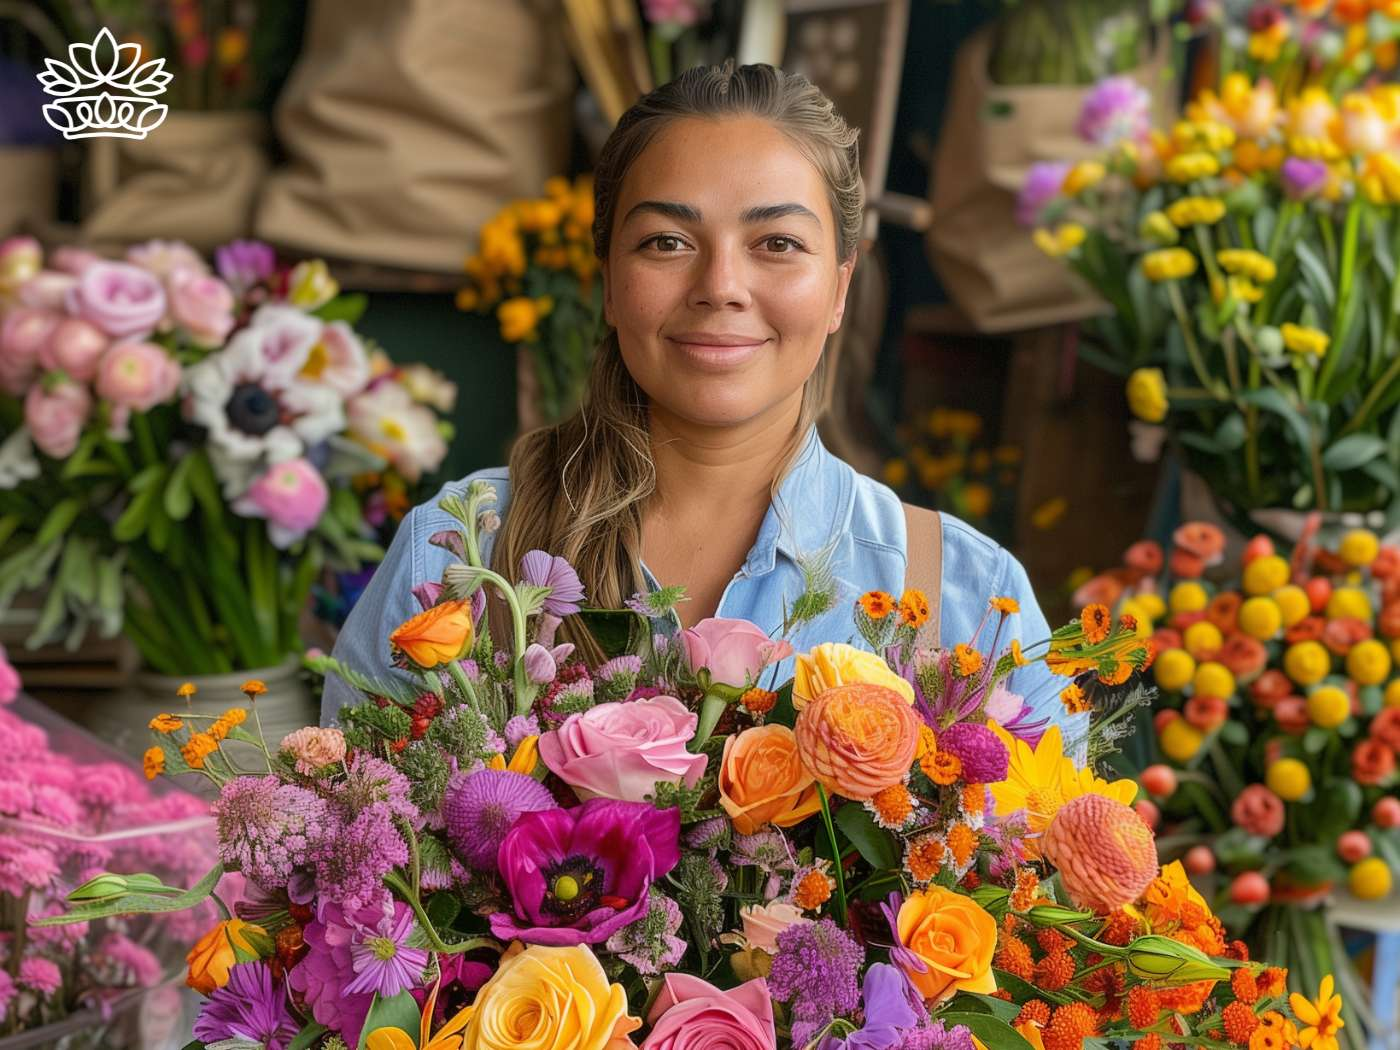 Confident florist holding a congratulations gift bouquet bursting with vivid hues, including purple anemones and orange roses, showcasing a passion for botanical artistry at a colourful flower market—Fabulous Flowers and Gifts same day delivery.